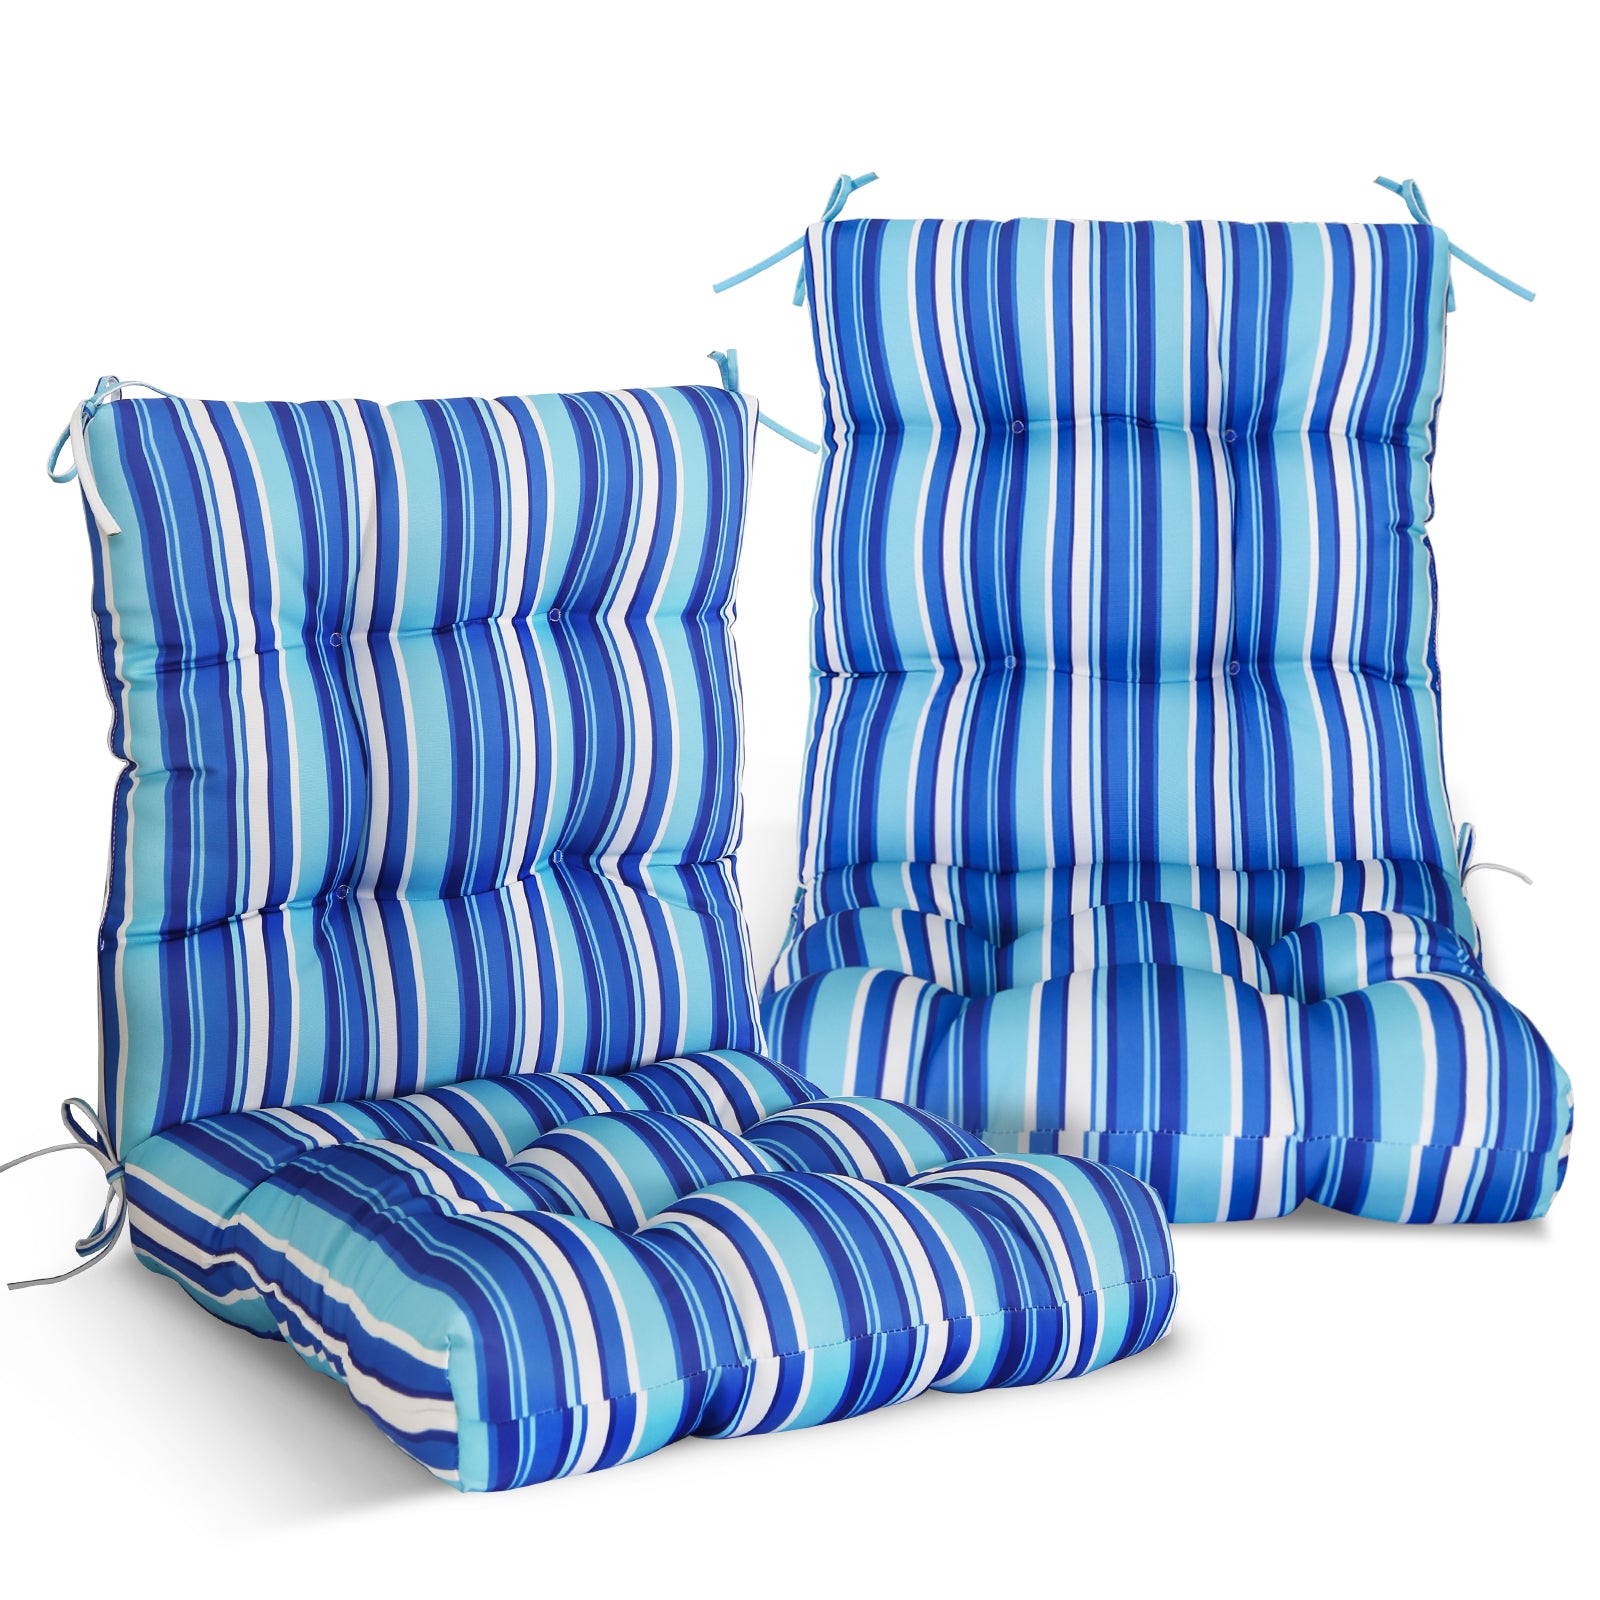 EAGLE PEAK Tufted Outdoor/Indoor High Back Patio Chair Cushion, Set of